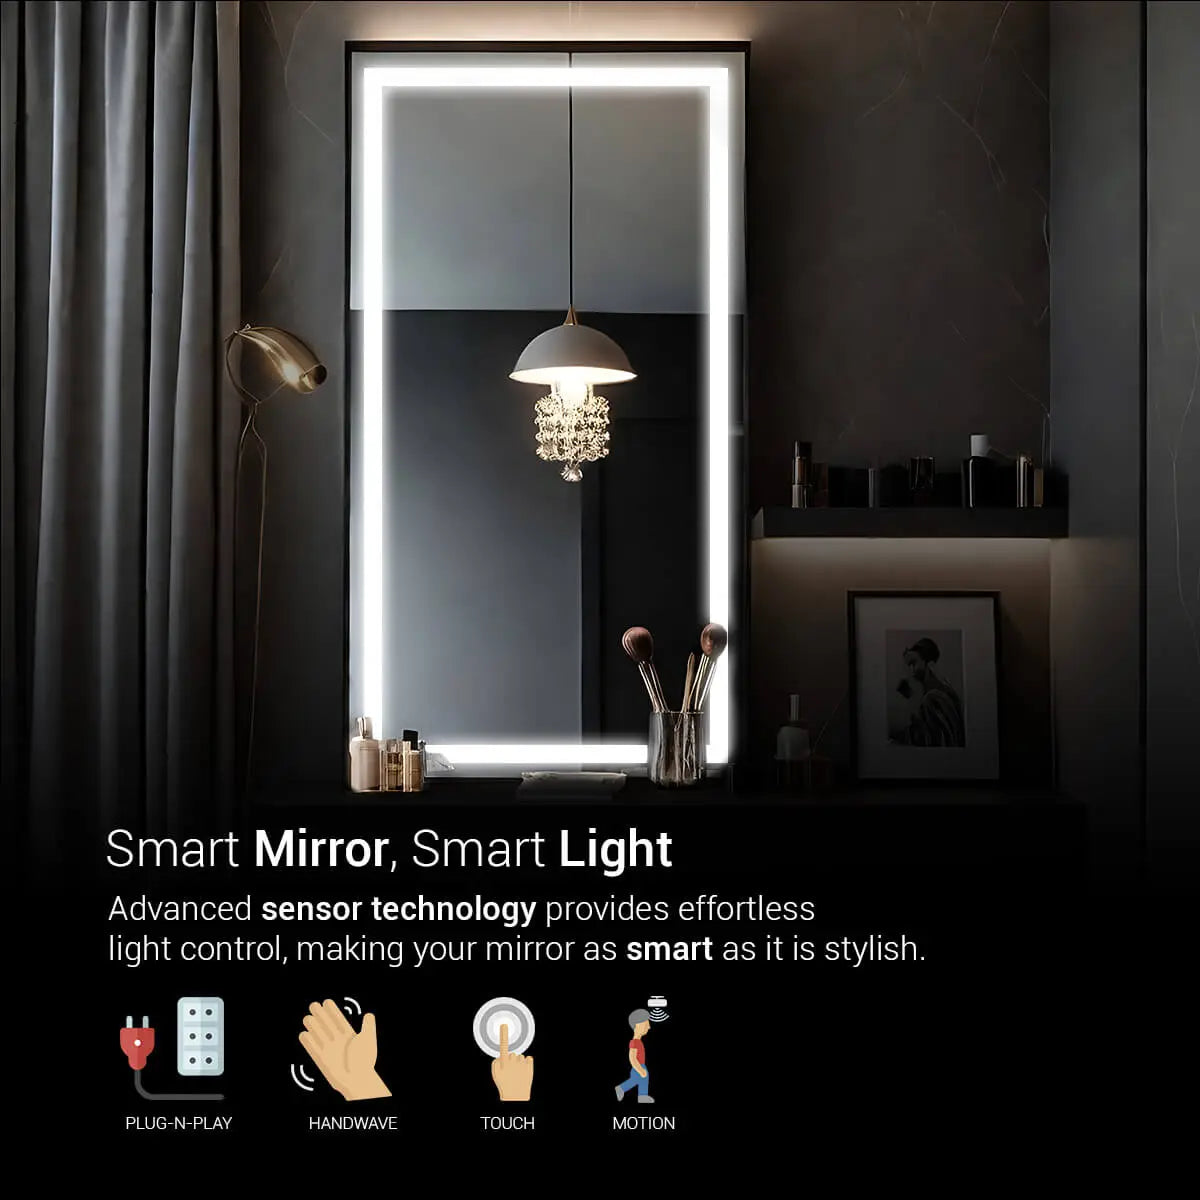 Modern Wall-mounted, rectangular smart mirror with a frameless design and adjustable LED light. This mirror is perfect for any bathroom or bedroom and provides a bright, clear reflection with customizable lighting options, the light can be controlled with touch, handwave, or motion sensor technology.